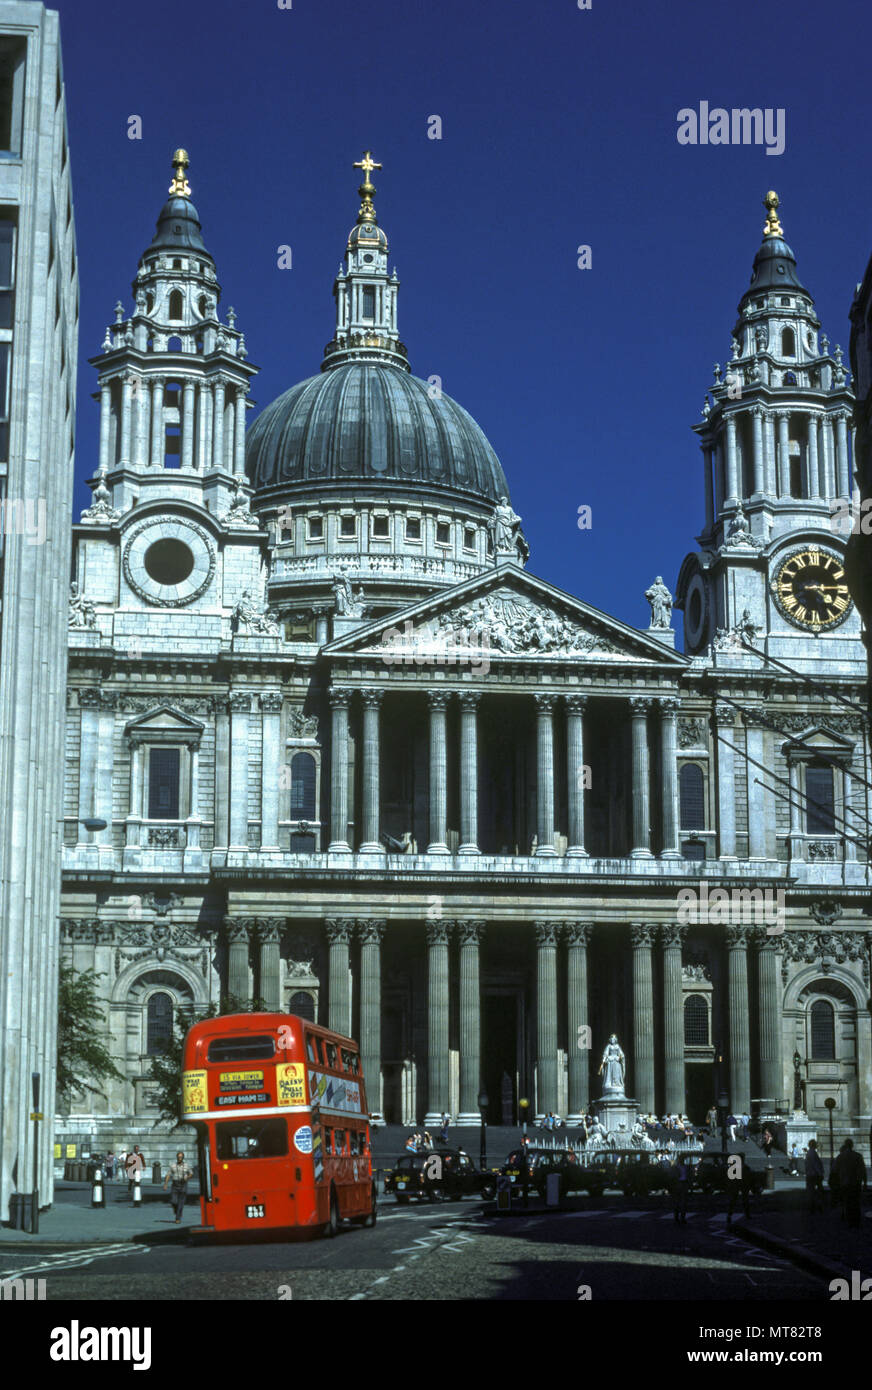 1988 HISTORICAL SAINT PAUL’S CATHEDRAL LUDGATE HILL LONDON ENGLAND UK Stock Photo